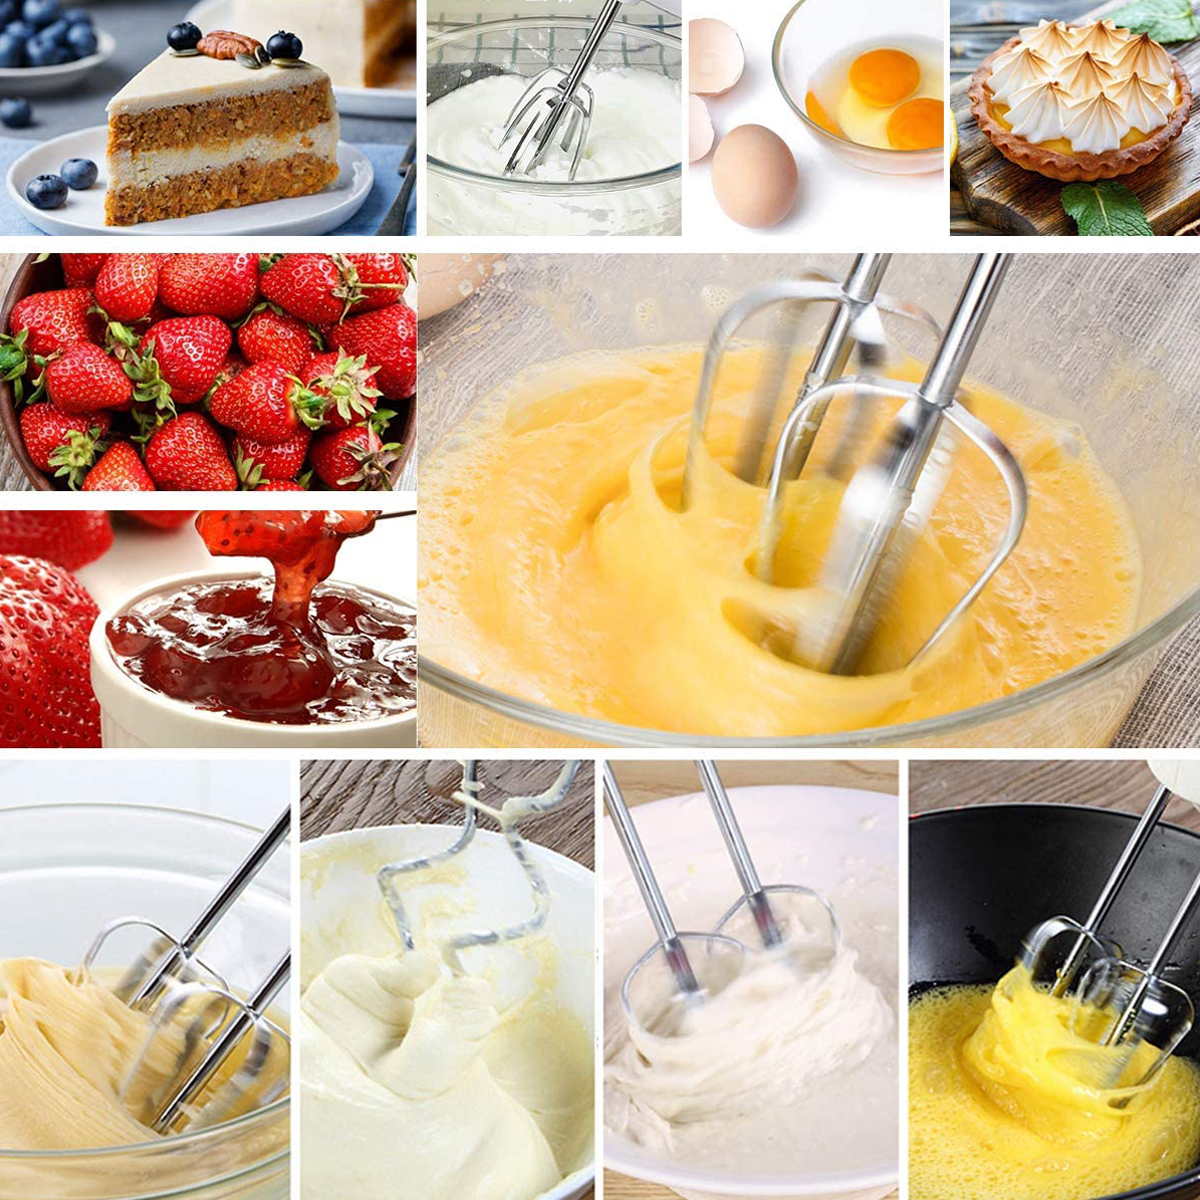 SOKANY 6638 300W 220V 5 Speed Electric Hand Mixer Whisk Egg Beater Cake Baking Home Handheld Small Automatic Mini Cream Blenders